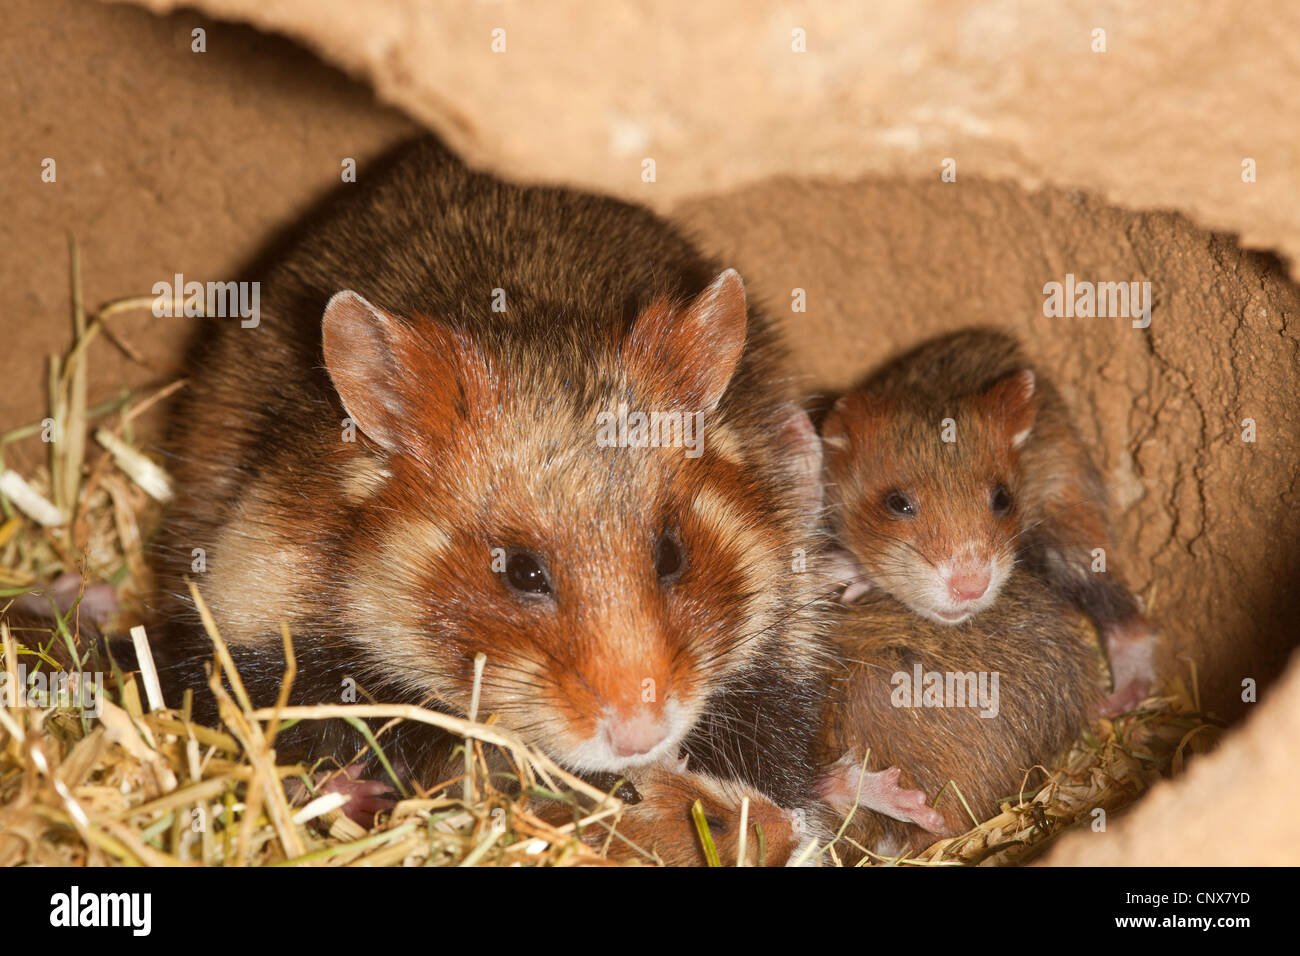 common hamster, black-bellied hamster (Cricetus cricetus), female with pups in a den, Germany Stock Photo